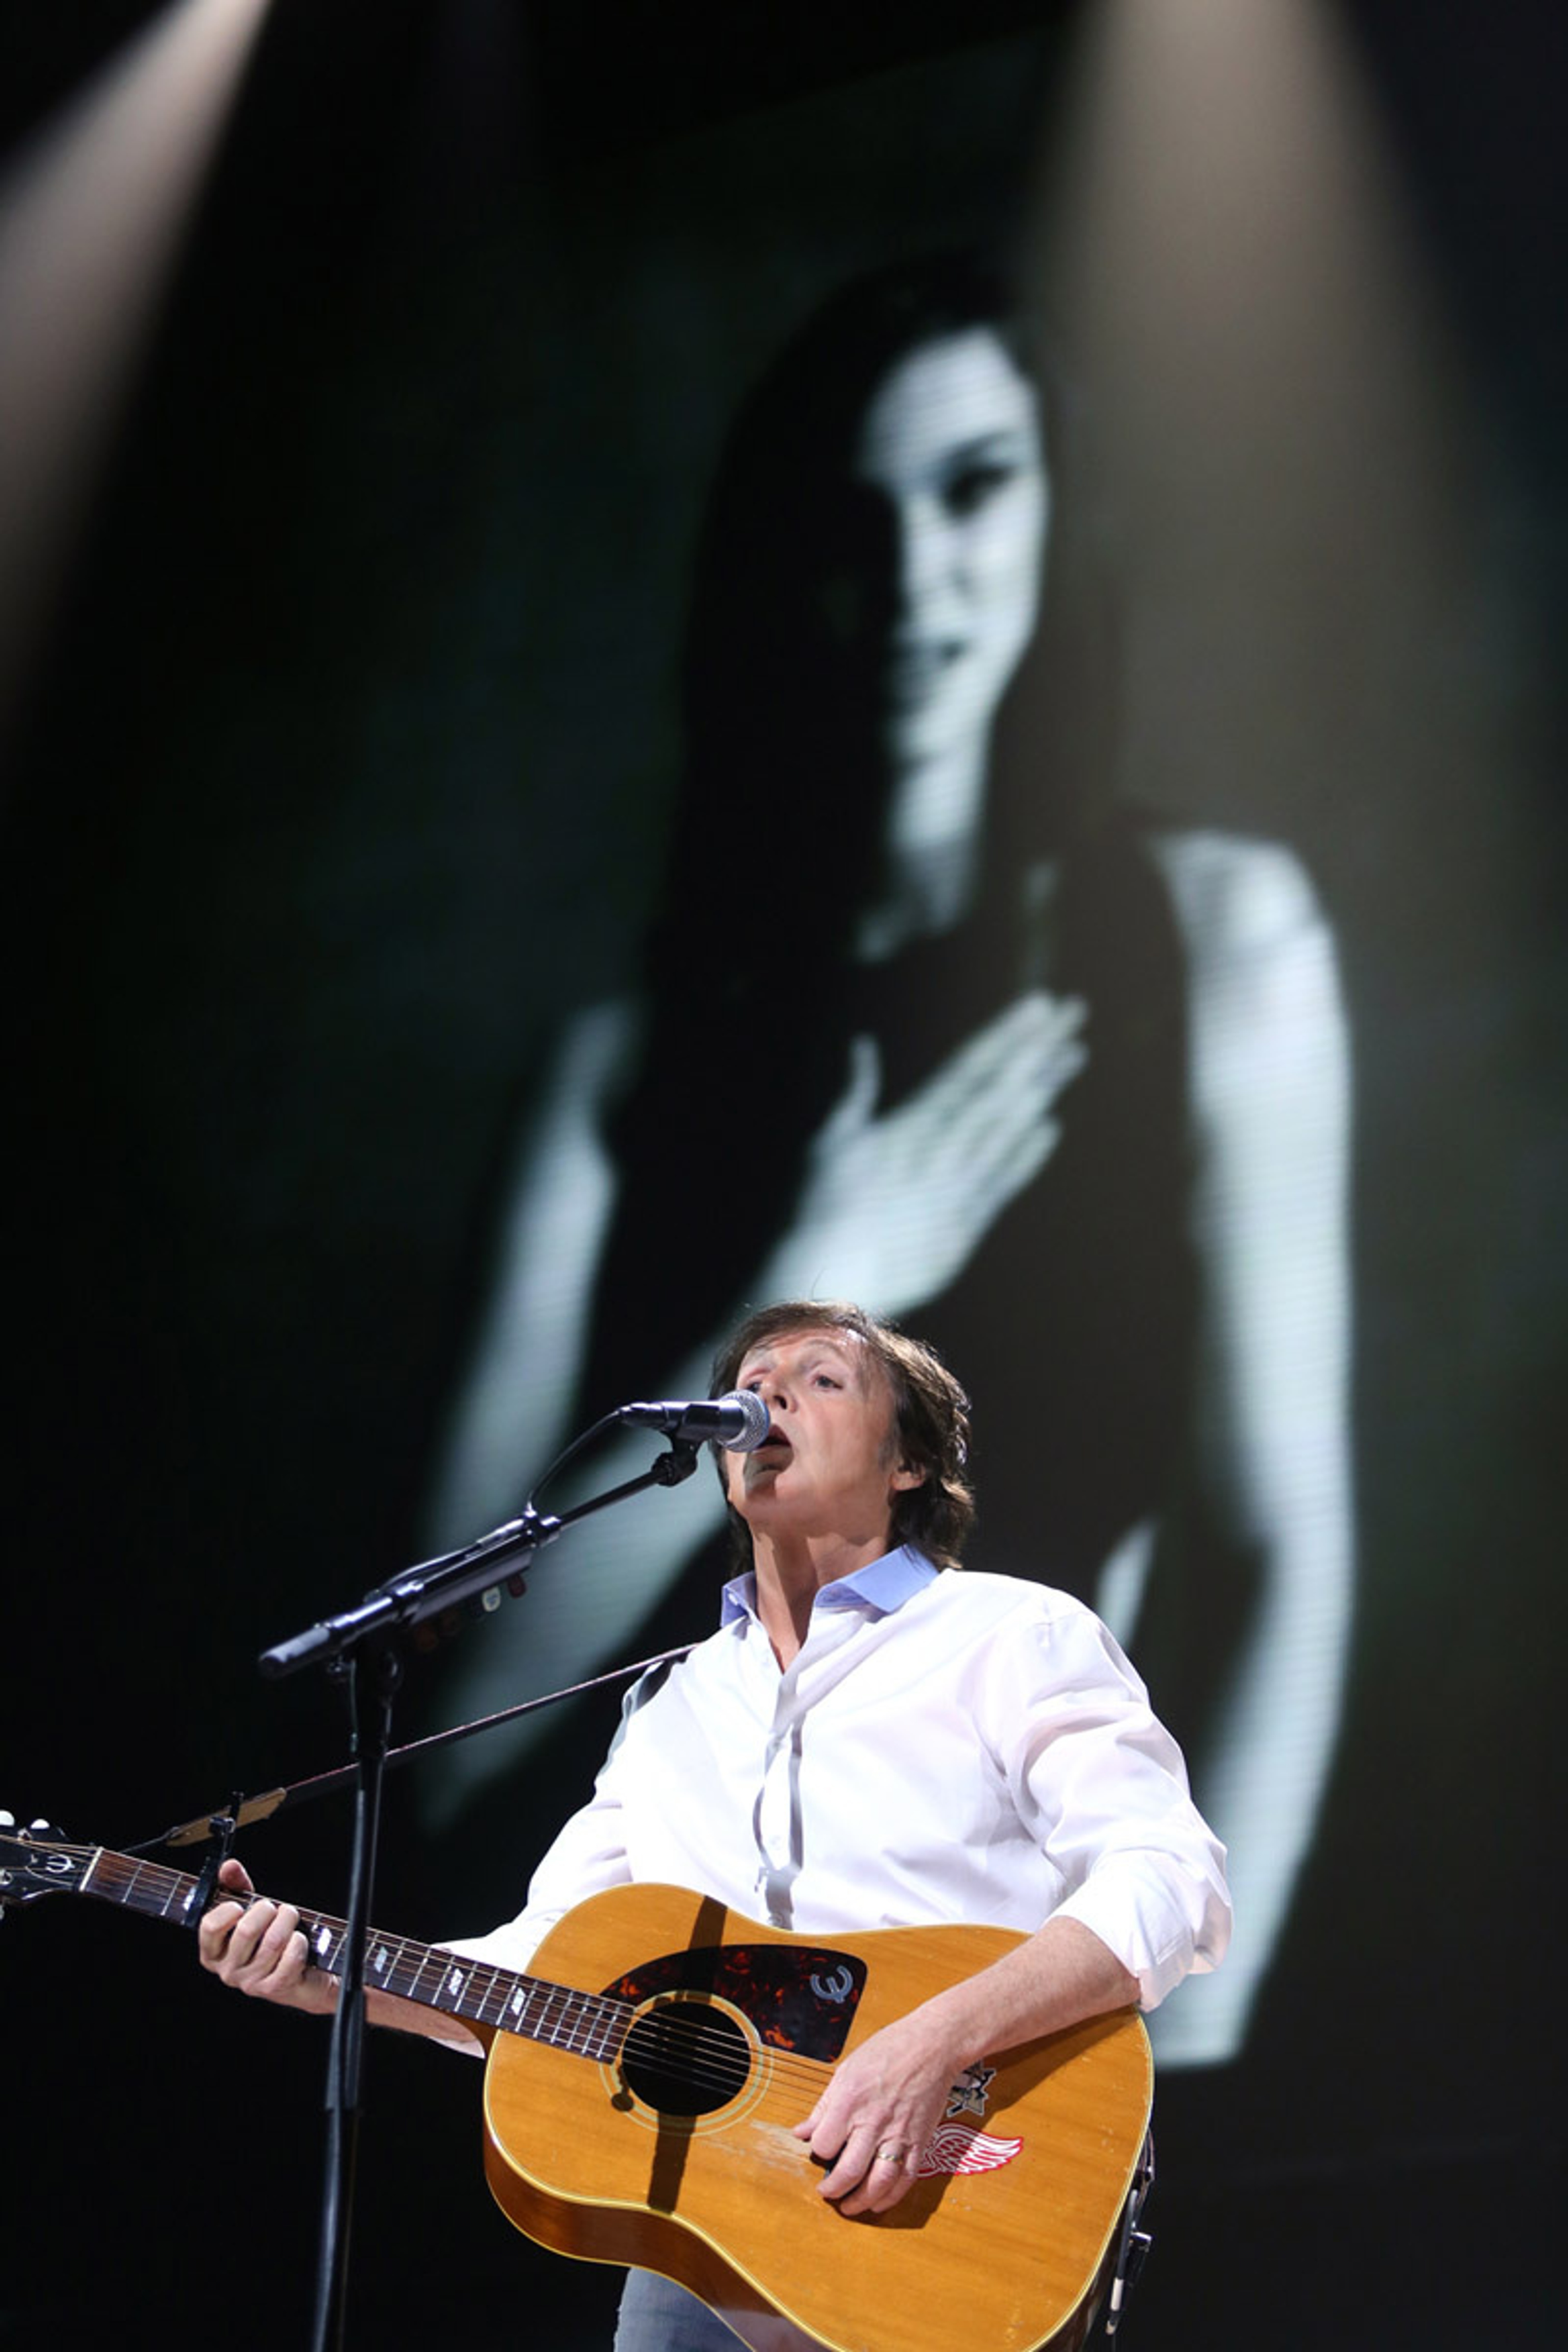 Paul with Natalie Portman on the screen during 'My Valentine', 12-12-12 Hurricane Sandy Benefit, Madison Square Garden, NYC, 12th December 2012